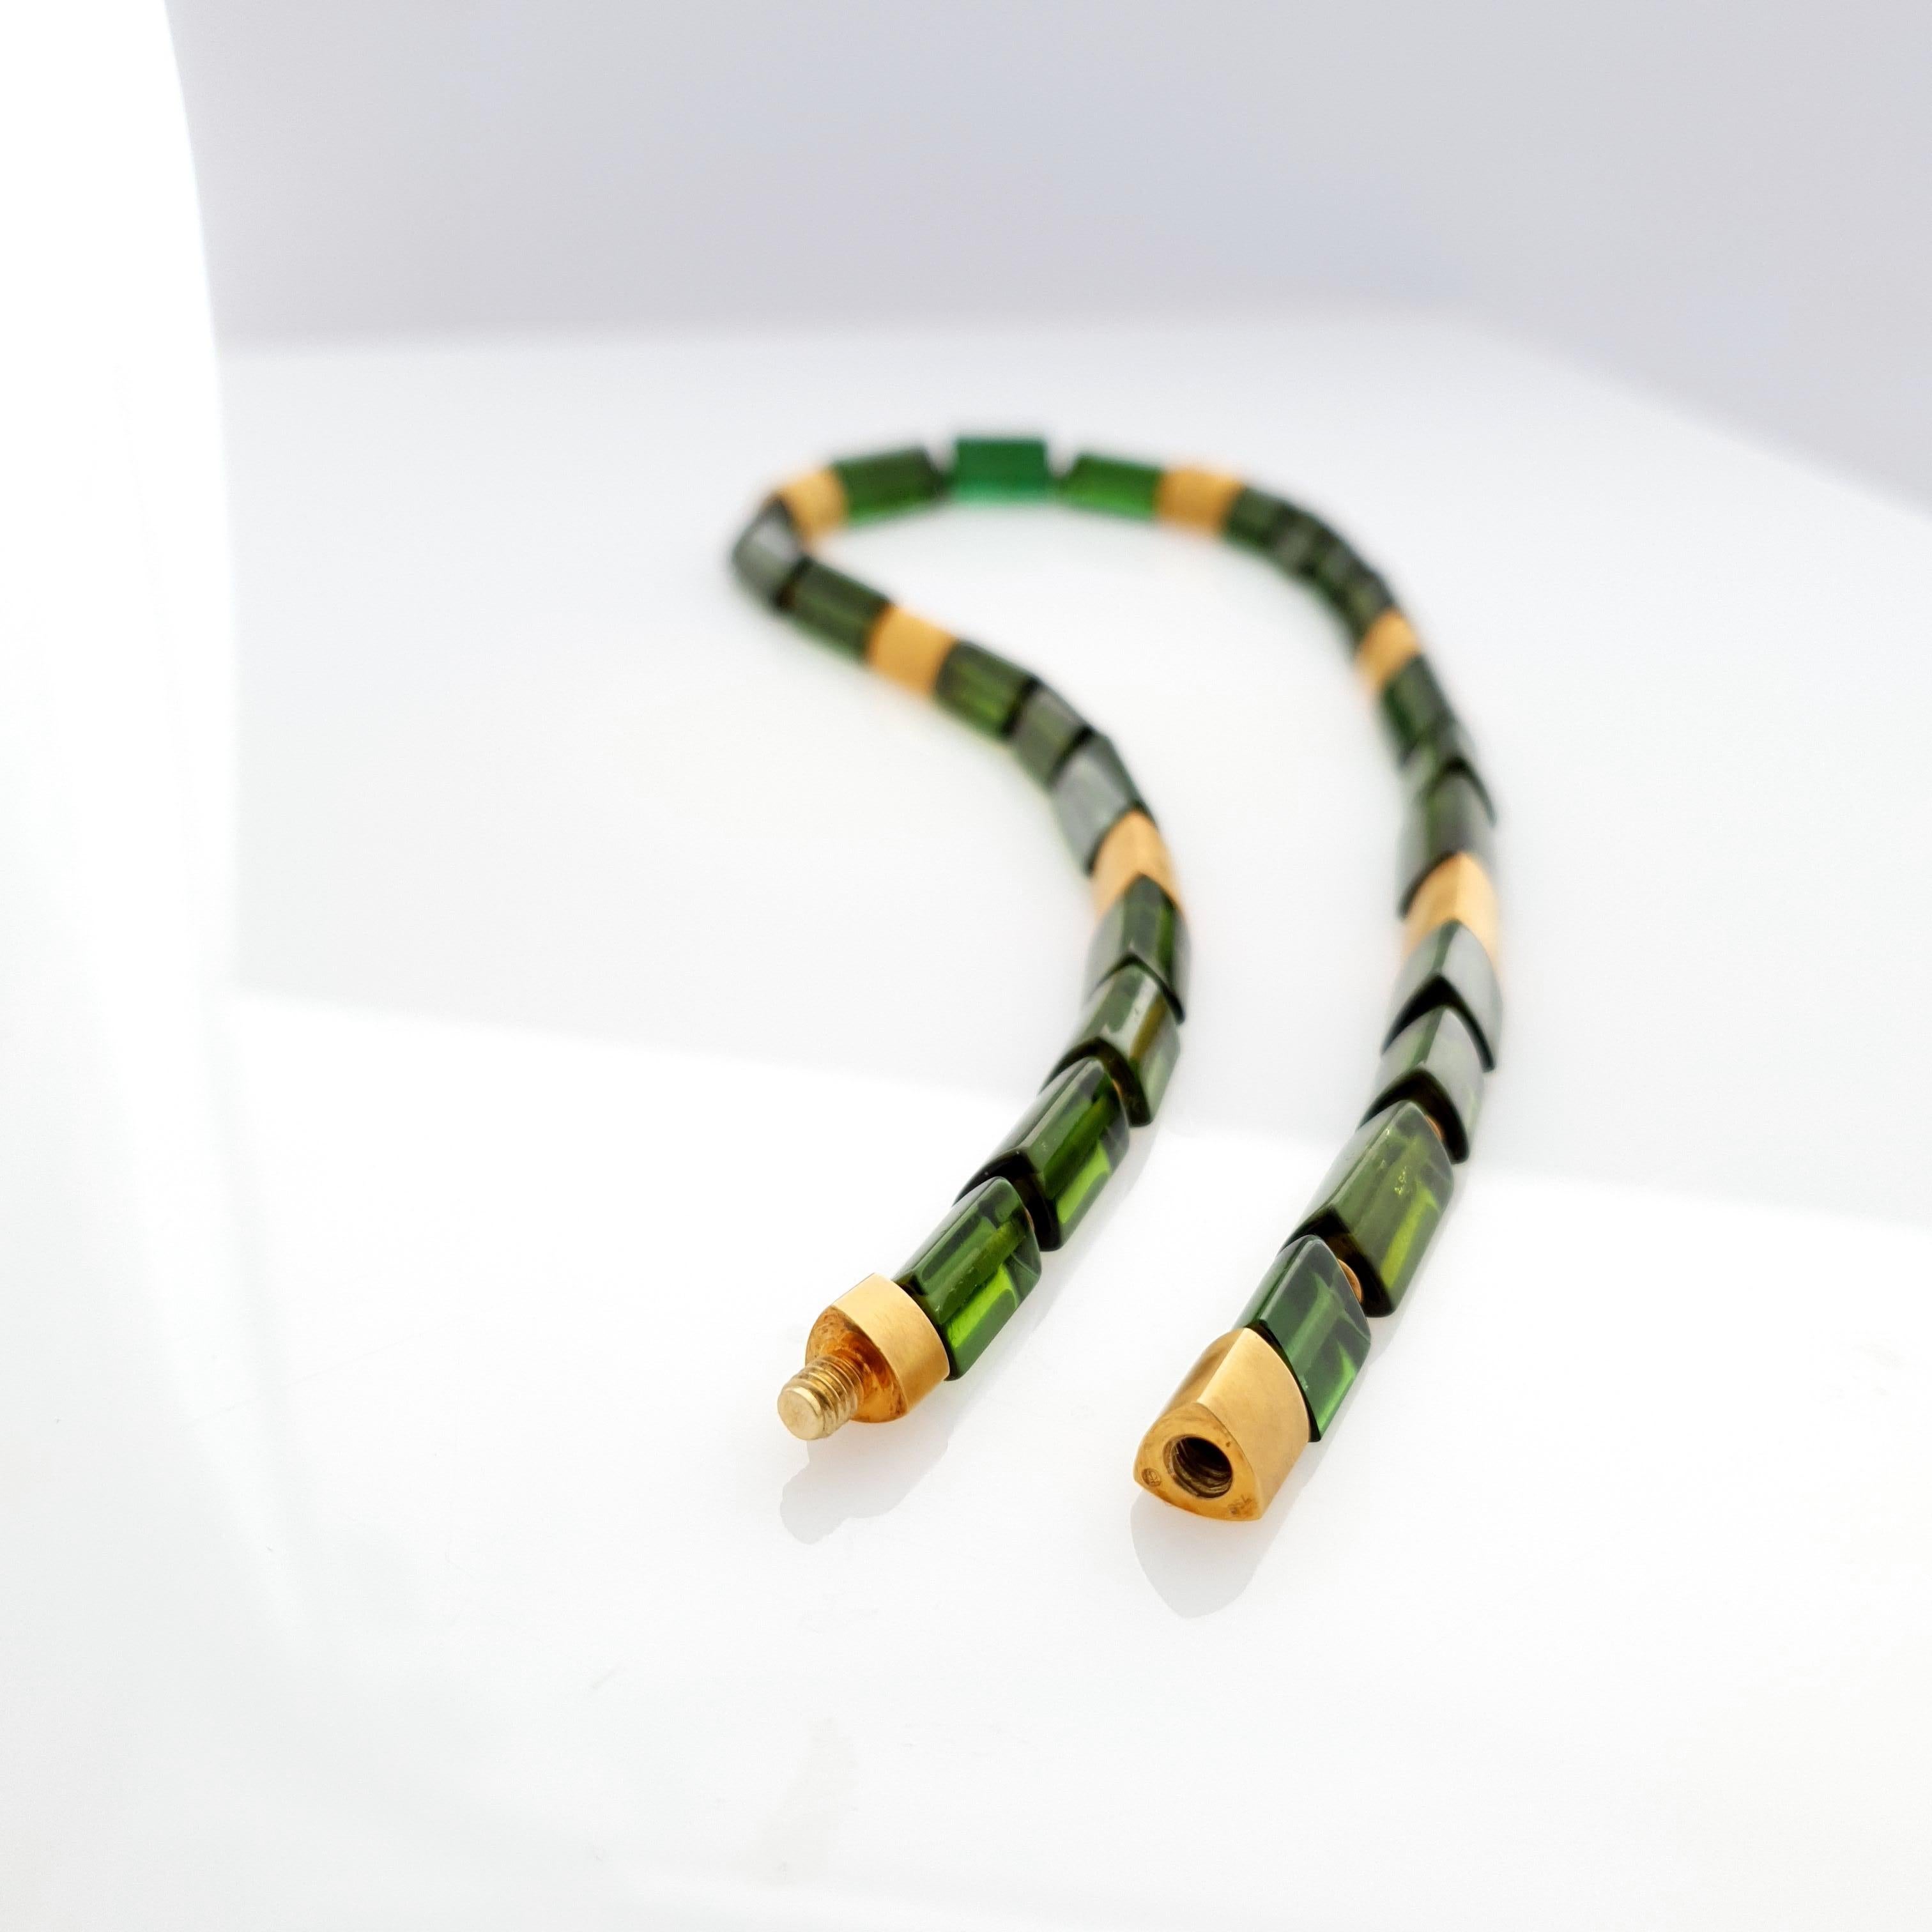 Intense Green Tourmaline Crystal Beaded Necklace with 18 Carat Mat Yellow Gold For Sale 3